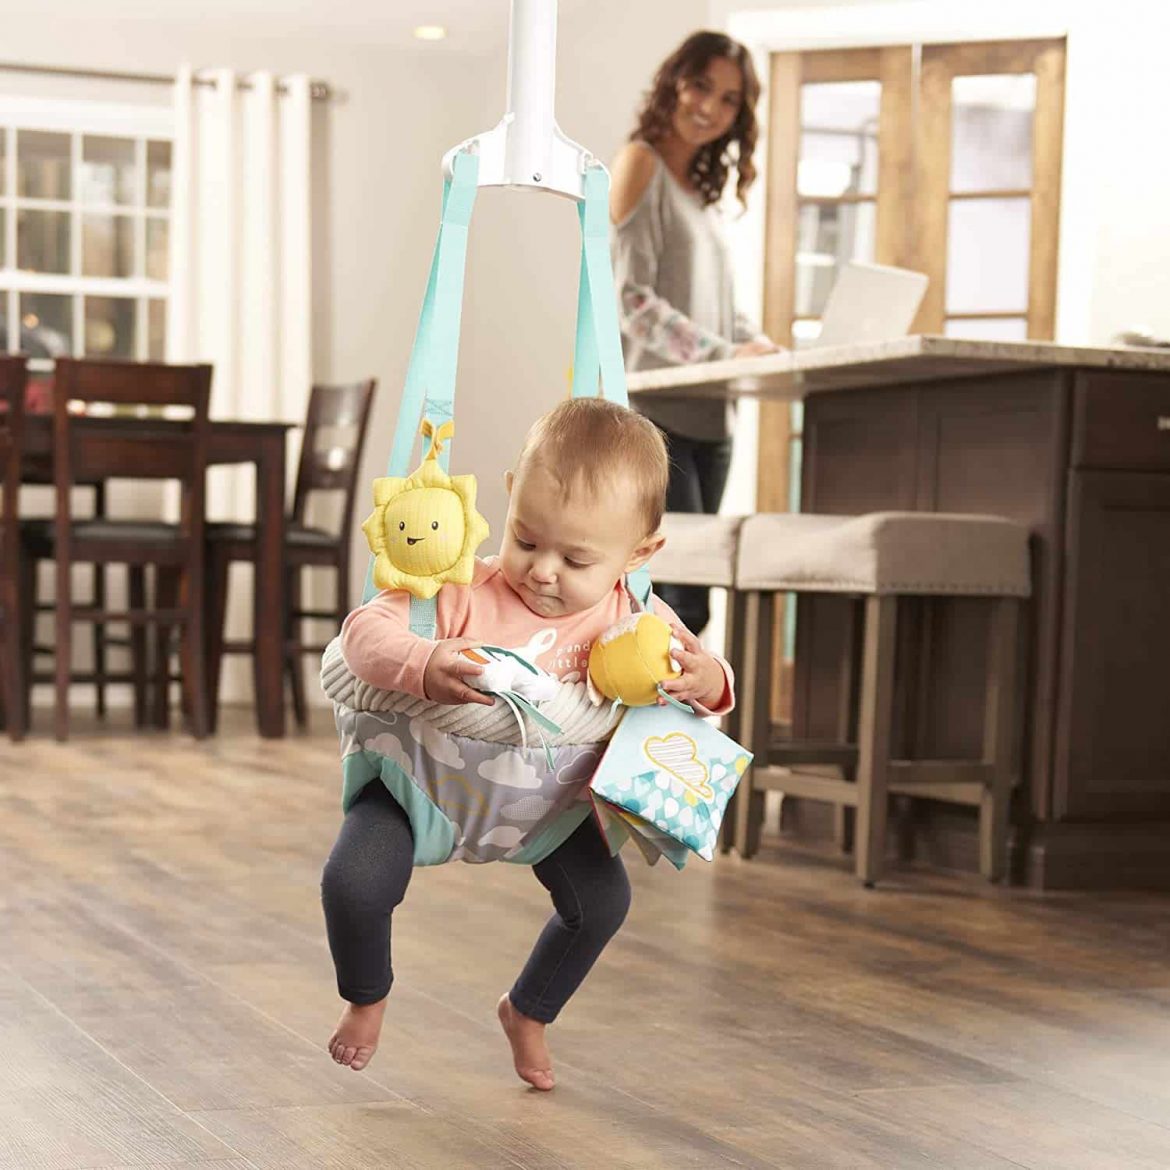 The Benefits of Using a Door Bouncer for Your Baby’s Development